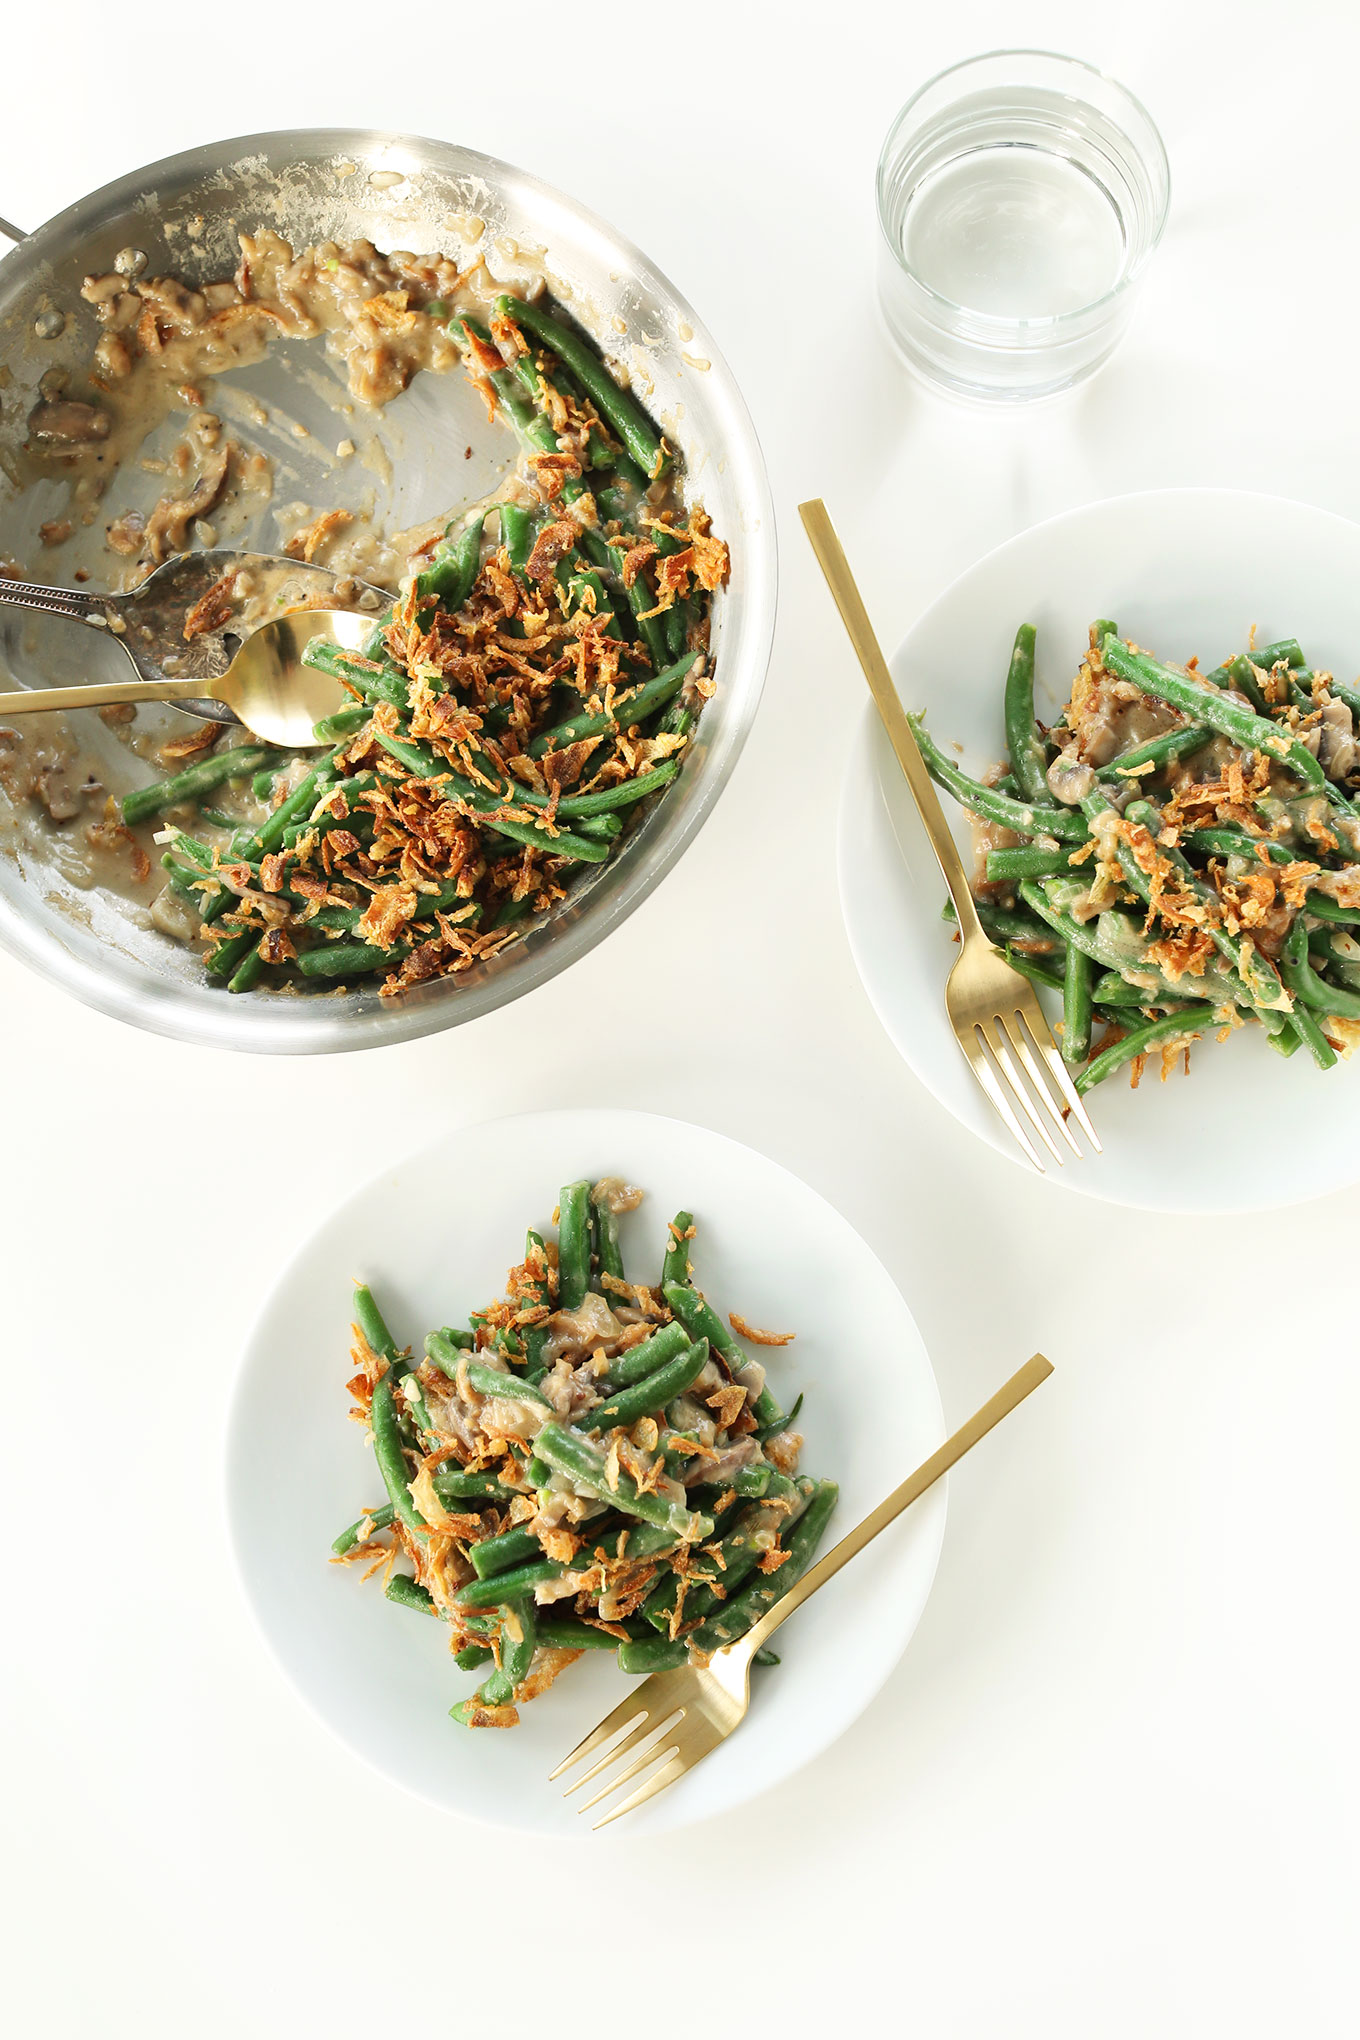 Using a spoon to scoop Vegan Green Bean Casserole onto serving plates